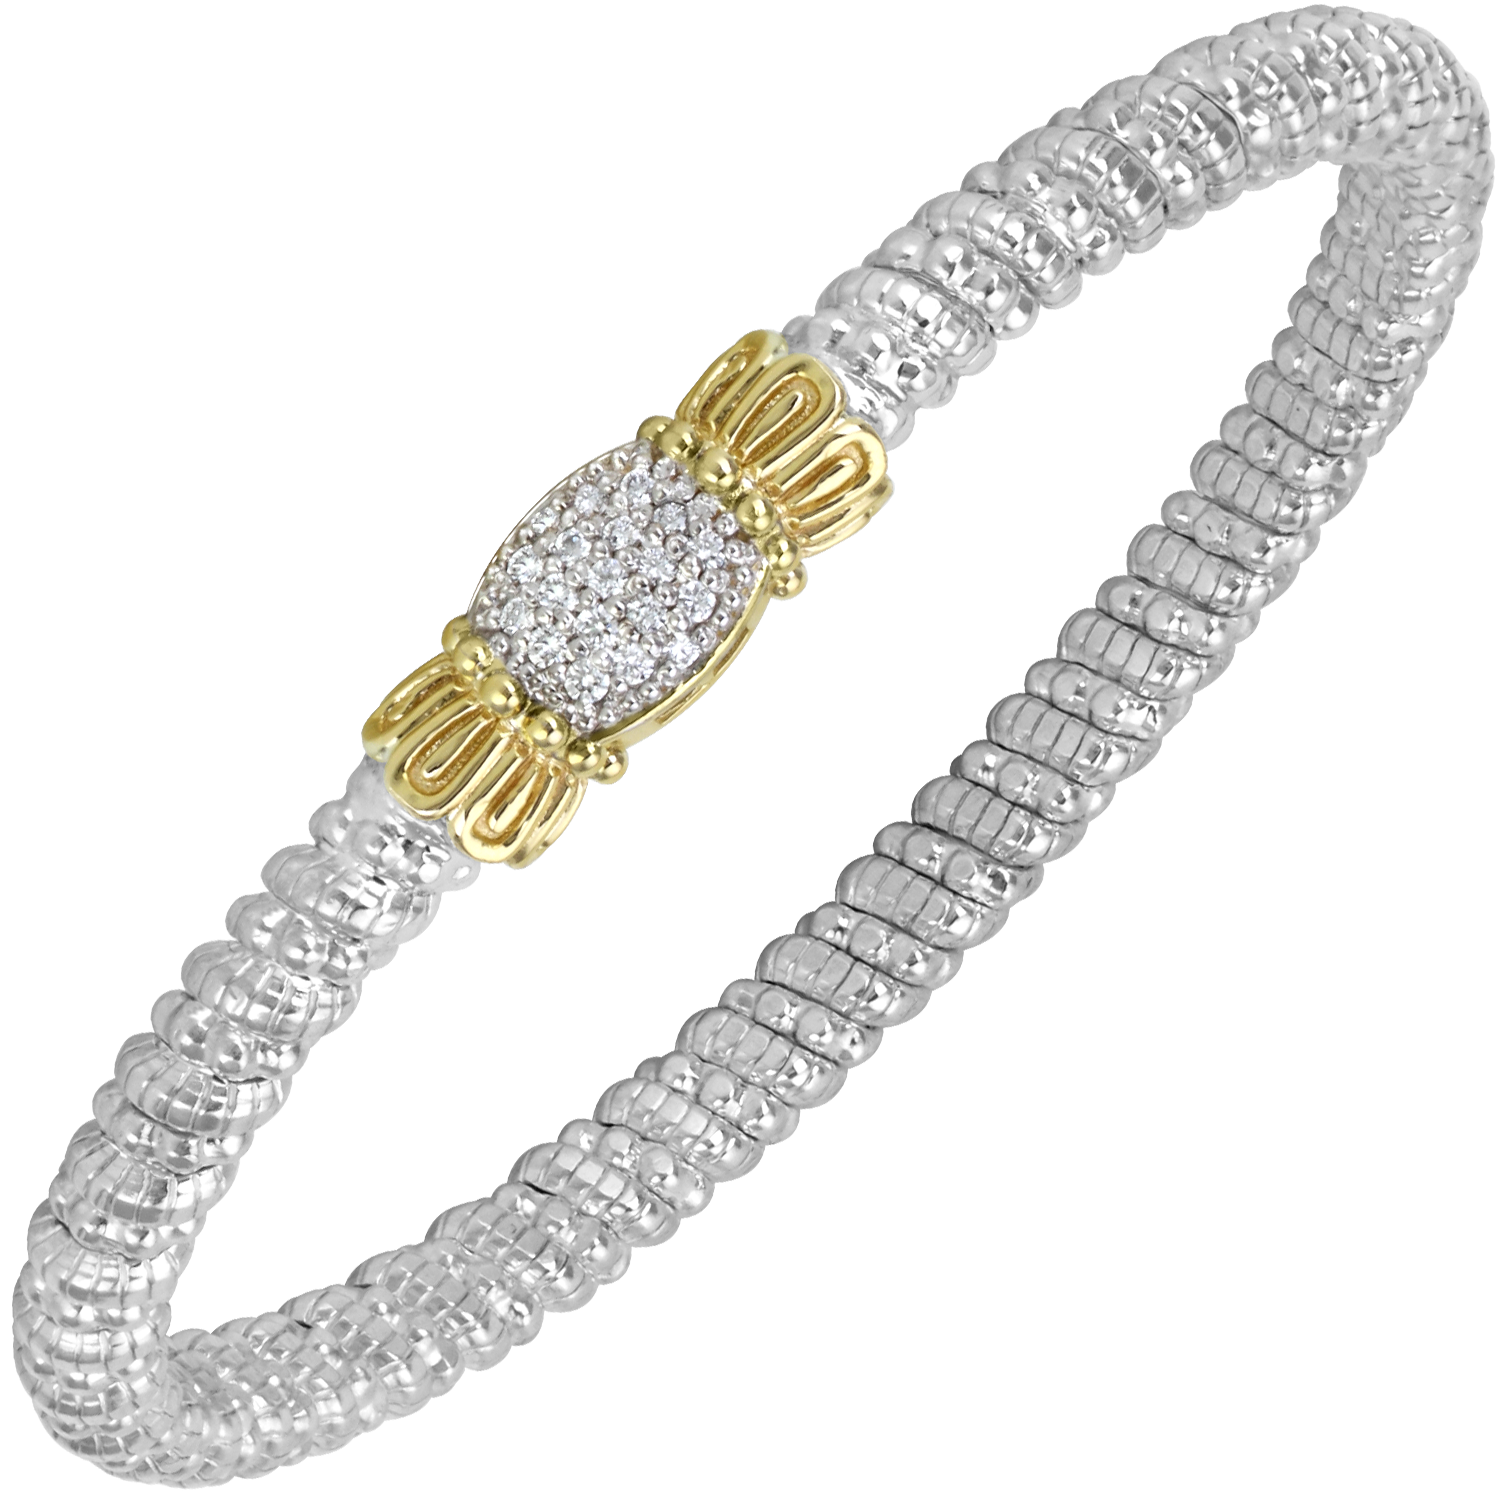 Vahan Essentails Sterling Silver & Yellow Gold Diamond Bracelet Galloway and Moseley, Inc. Sumter, SC